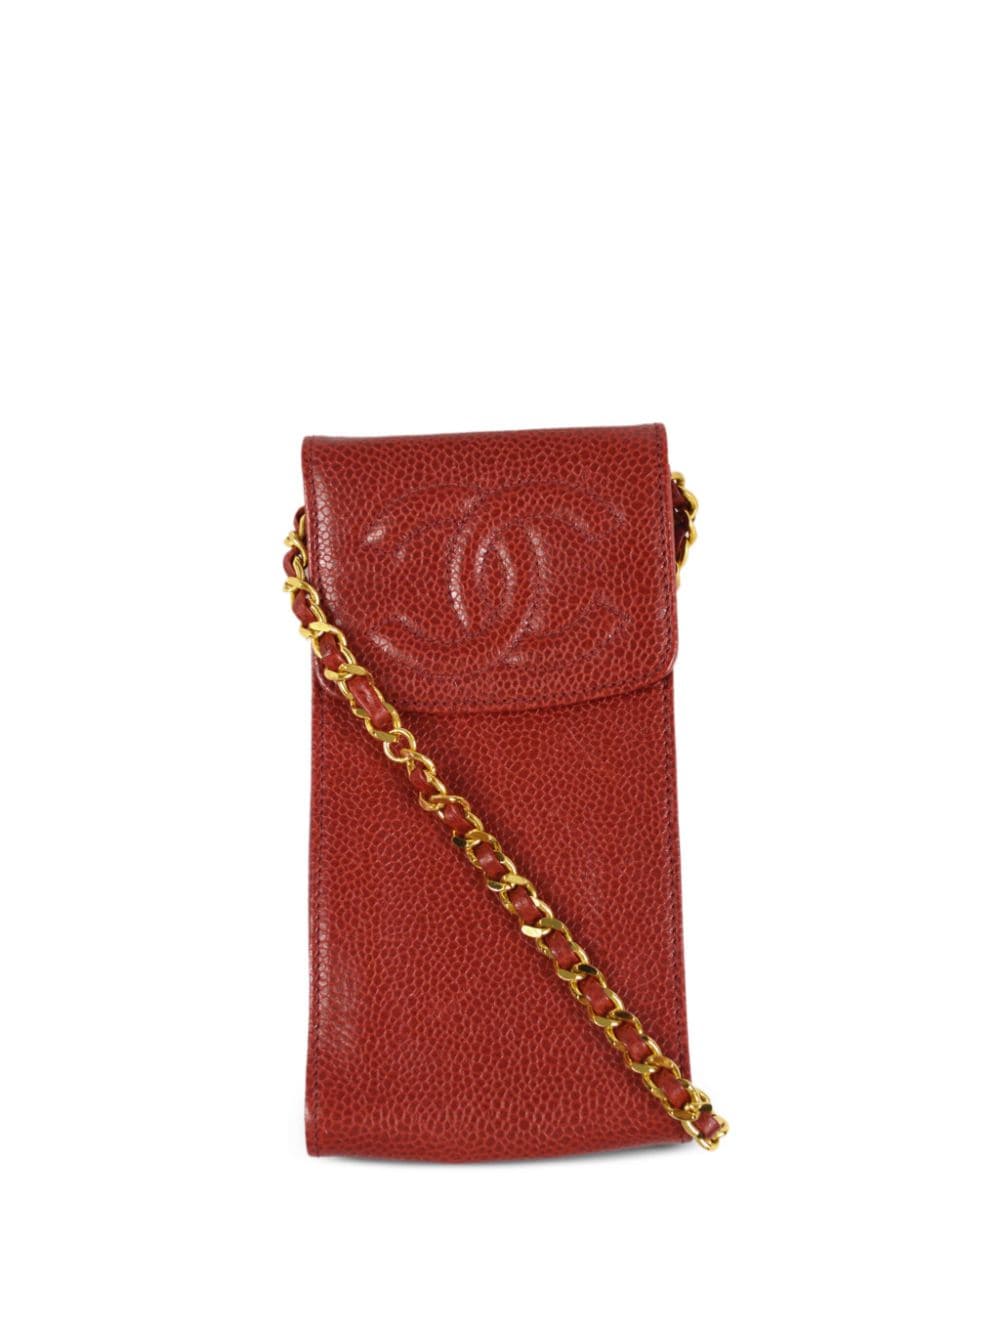 CHANEL Pre-Owned 1997 CC stitch sunglasses case shoulder bag - Red